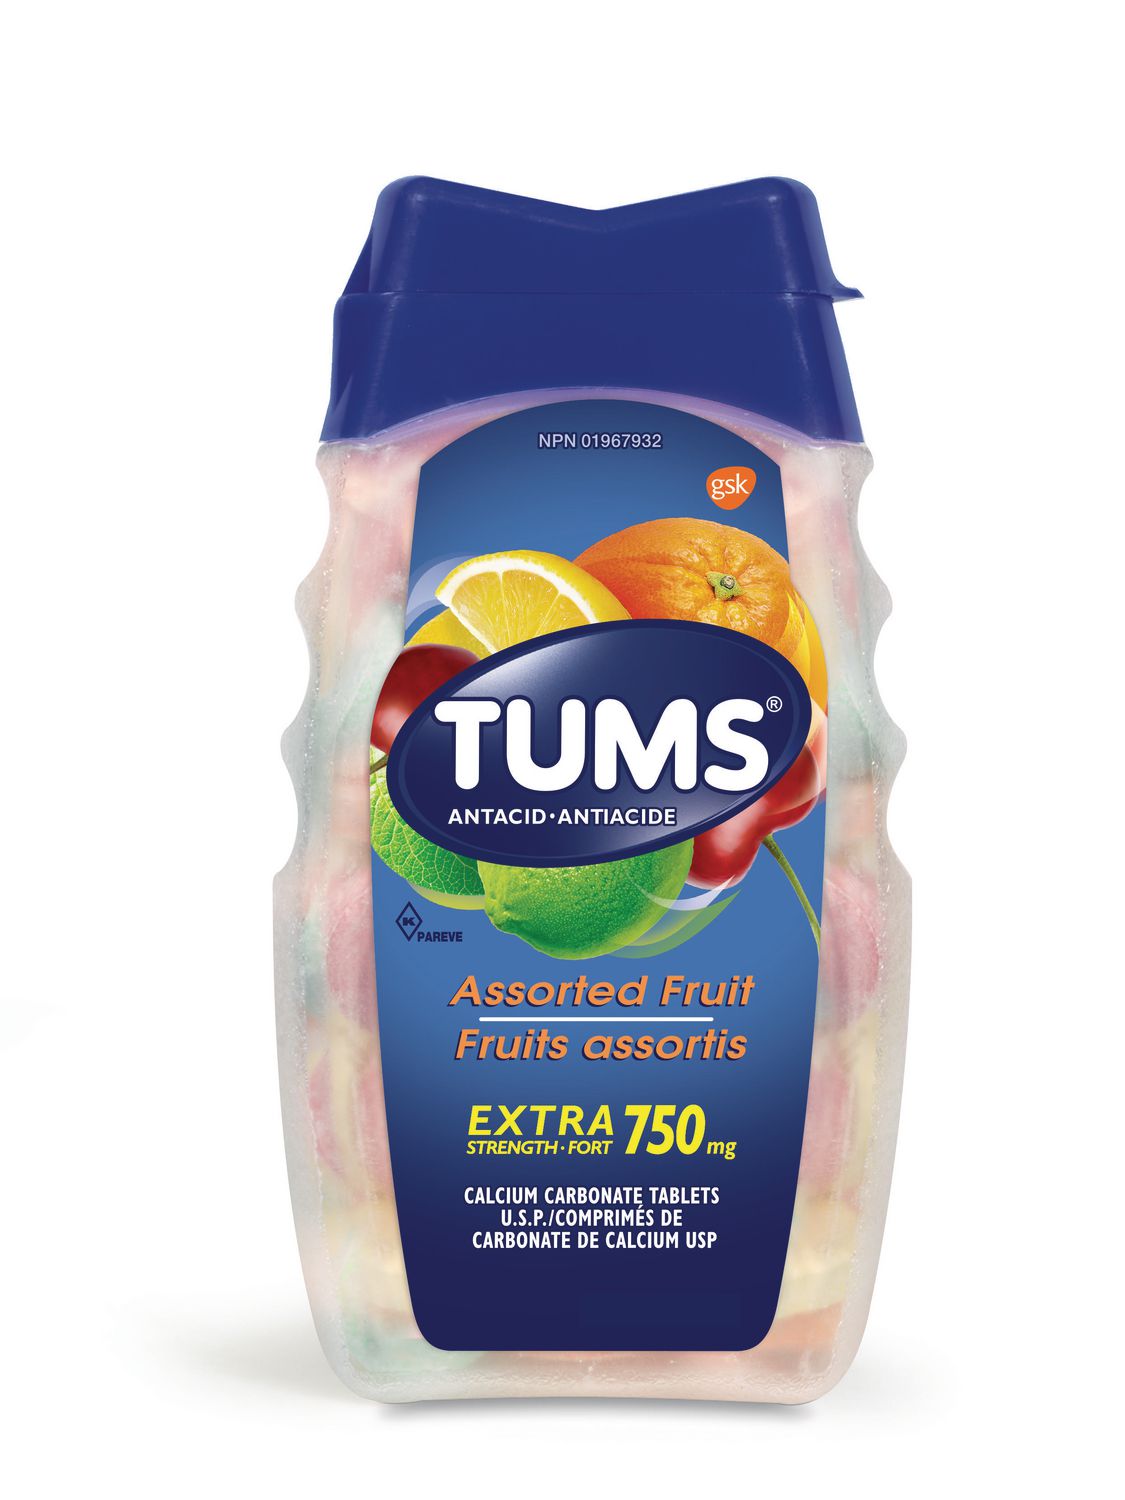 Tums Extra Strength 750mg 100 Tablets